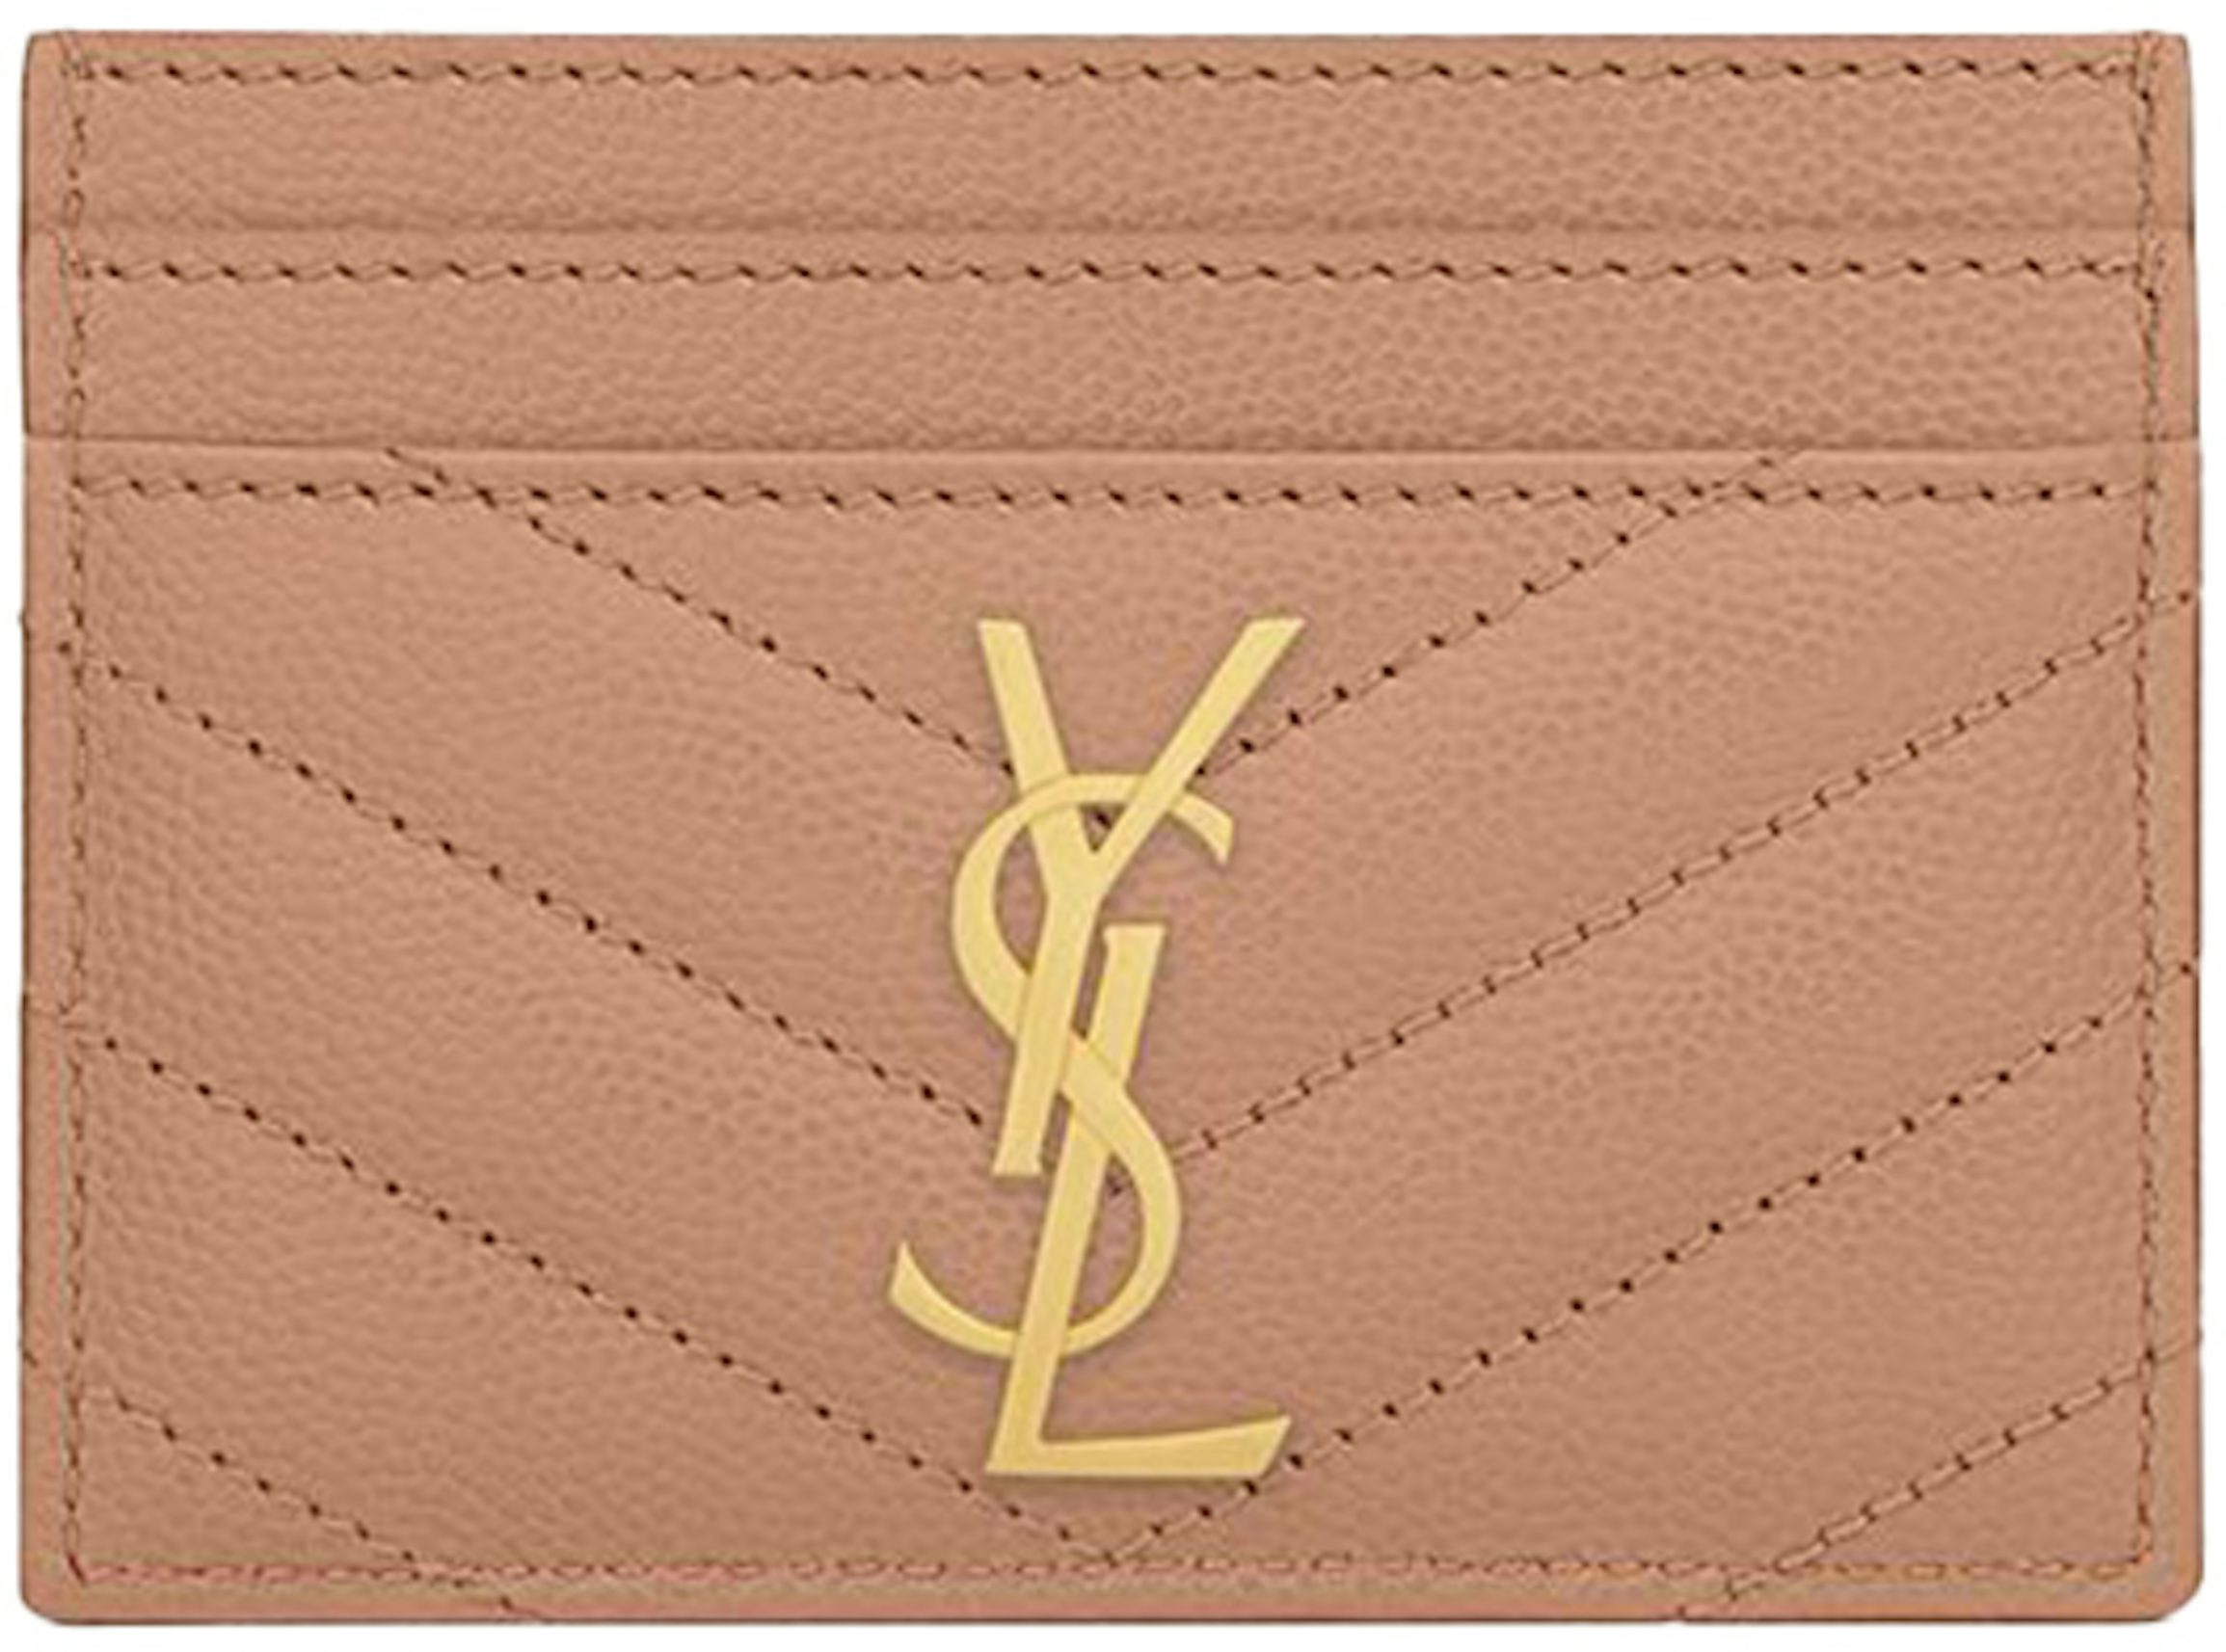 louis vuitton kaws iphone 14 pro max case Card holder shoulder leather case, by Saycase